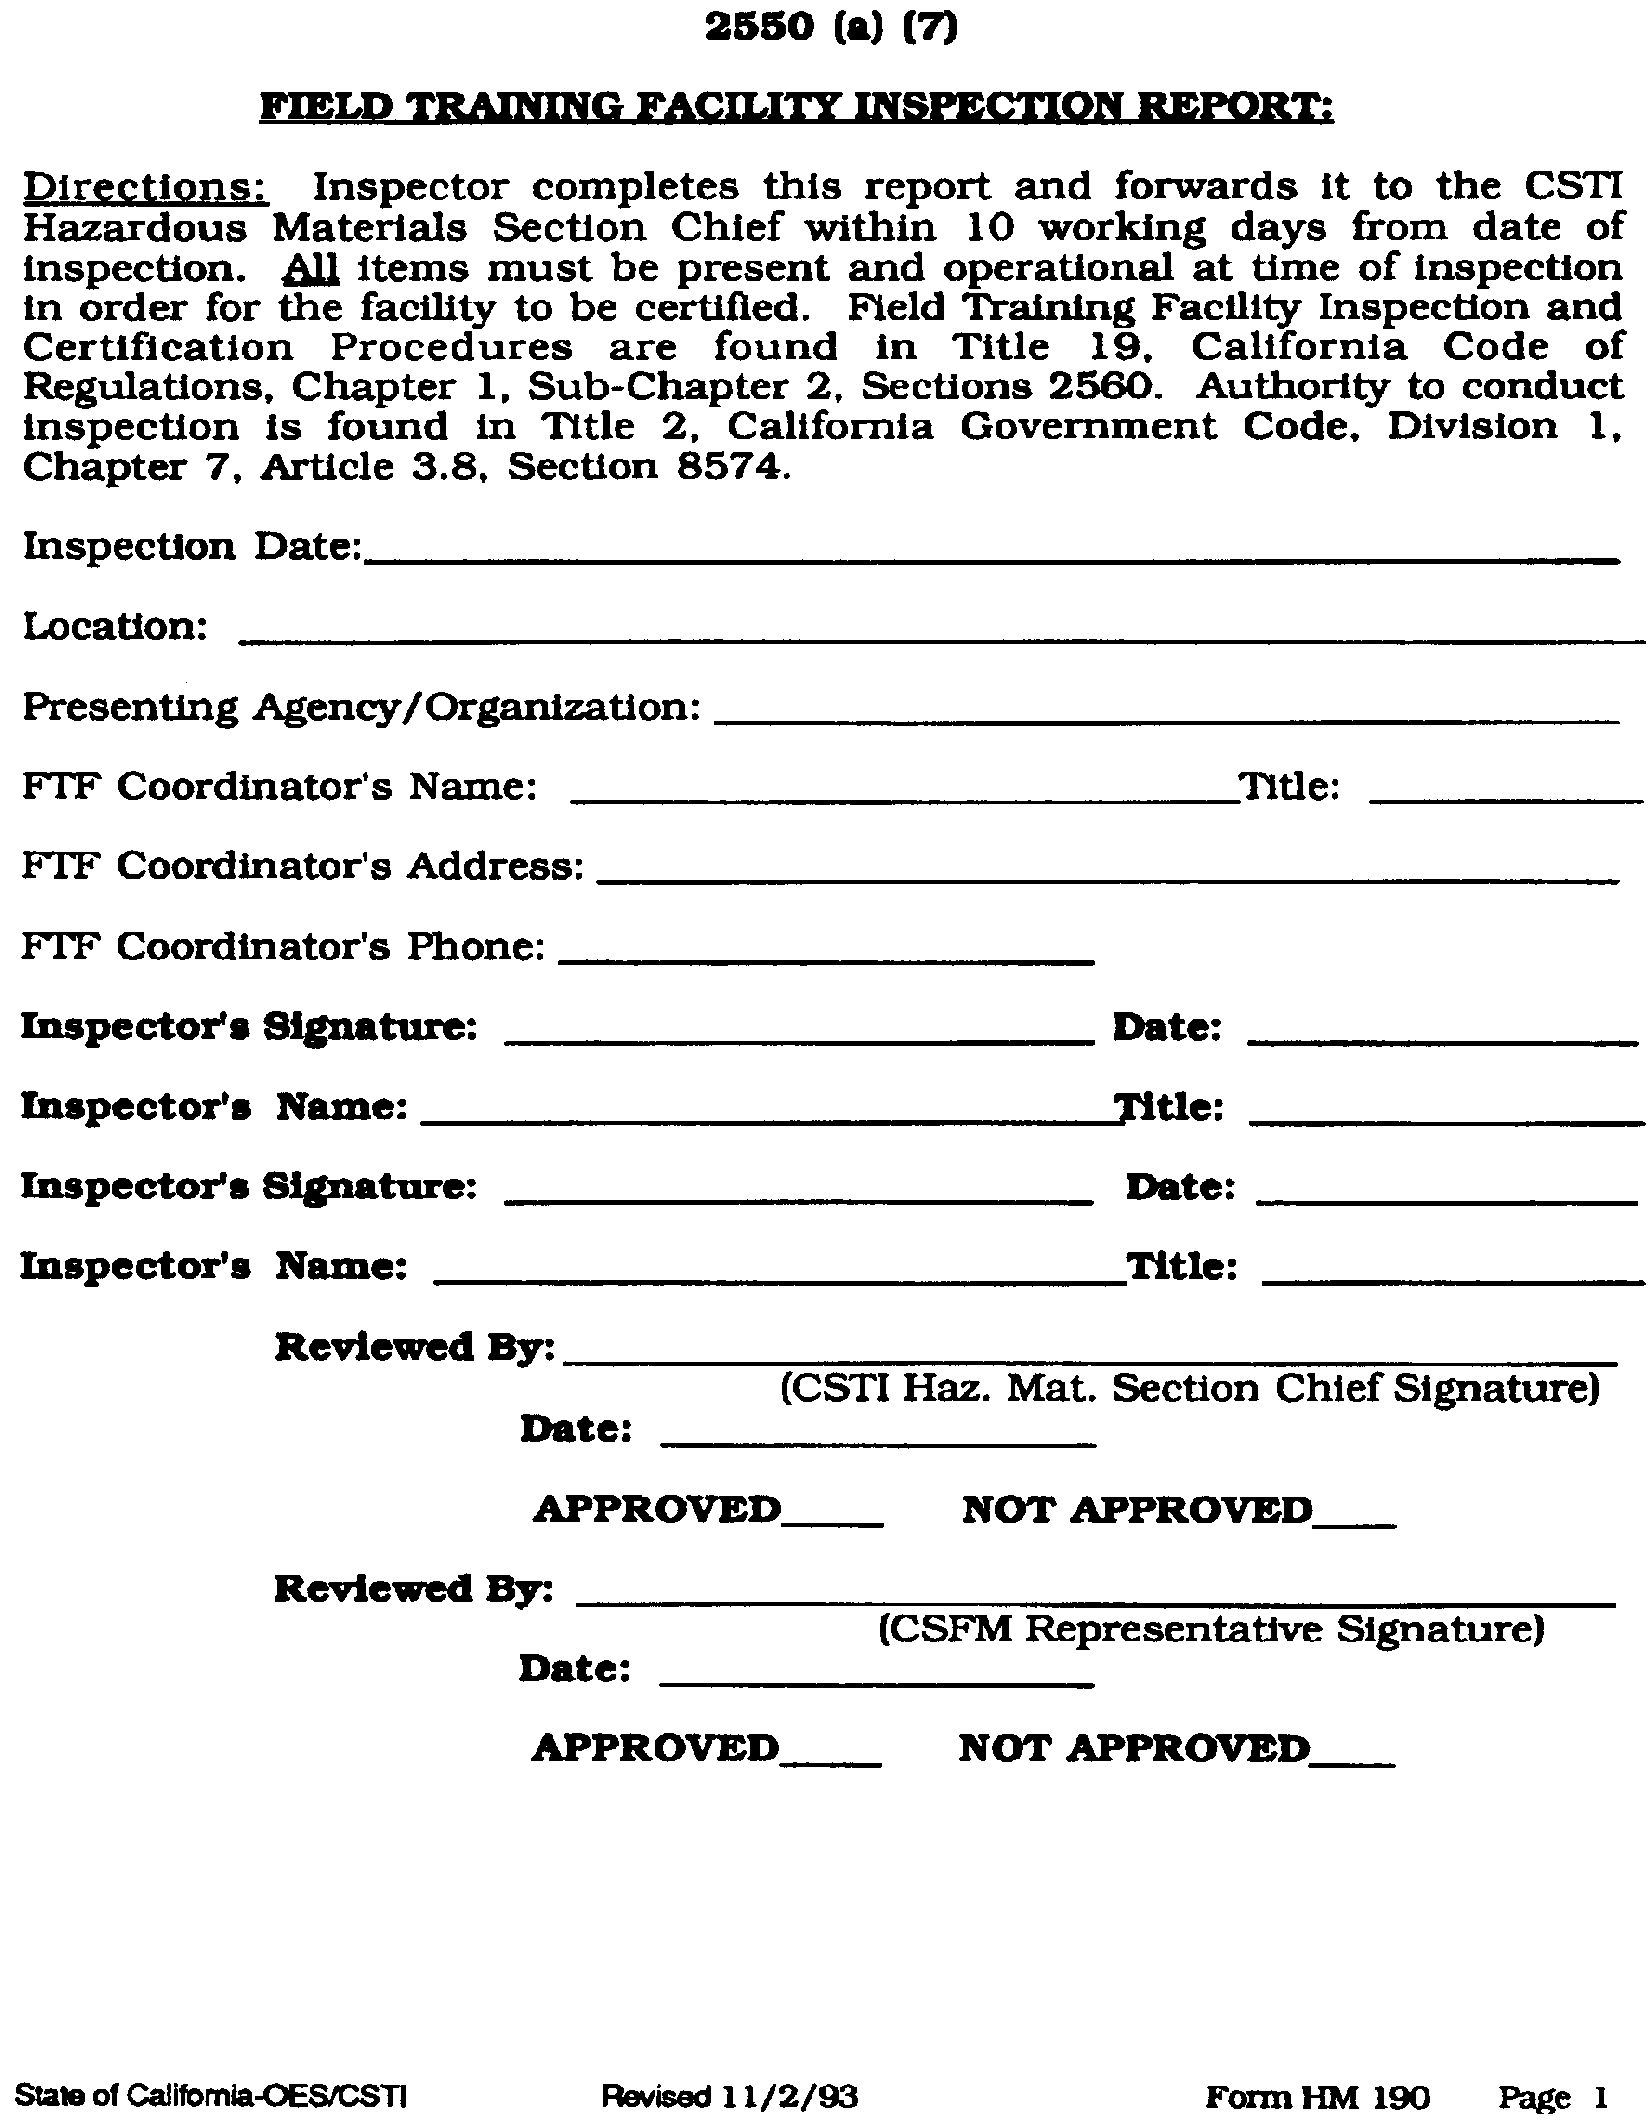 Image 12 within § 2550. Administrative Forms.